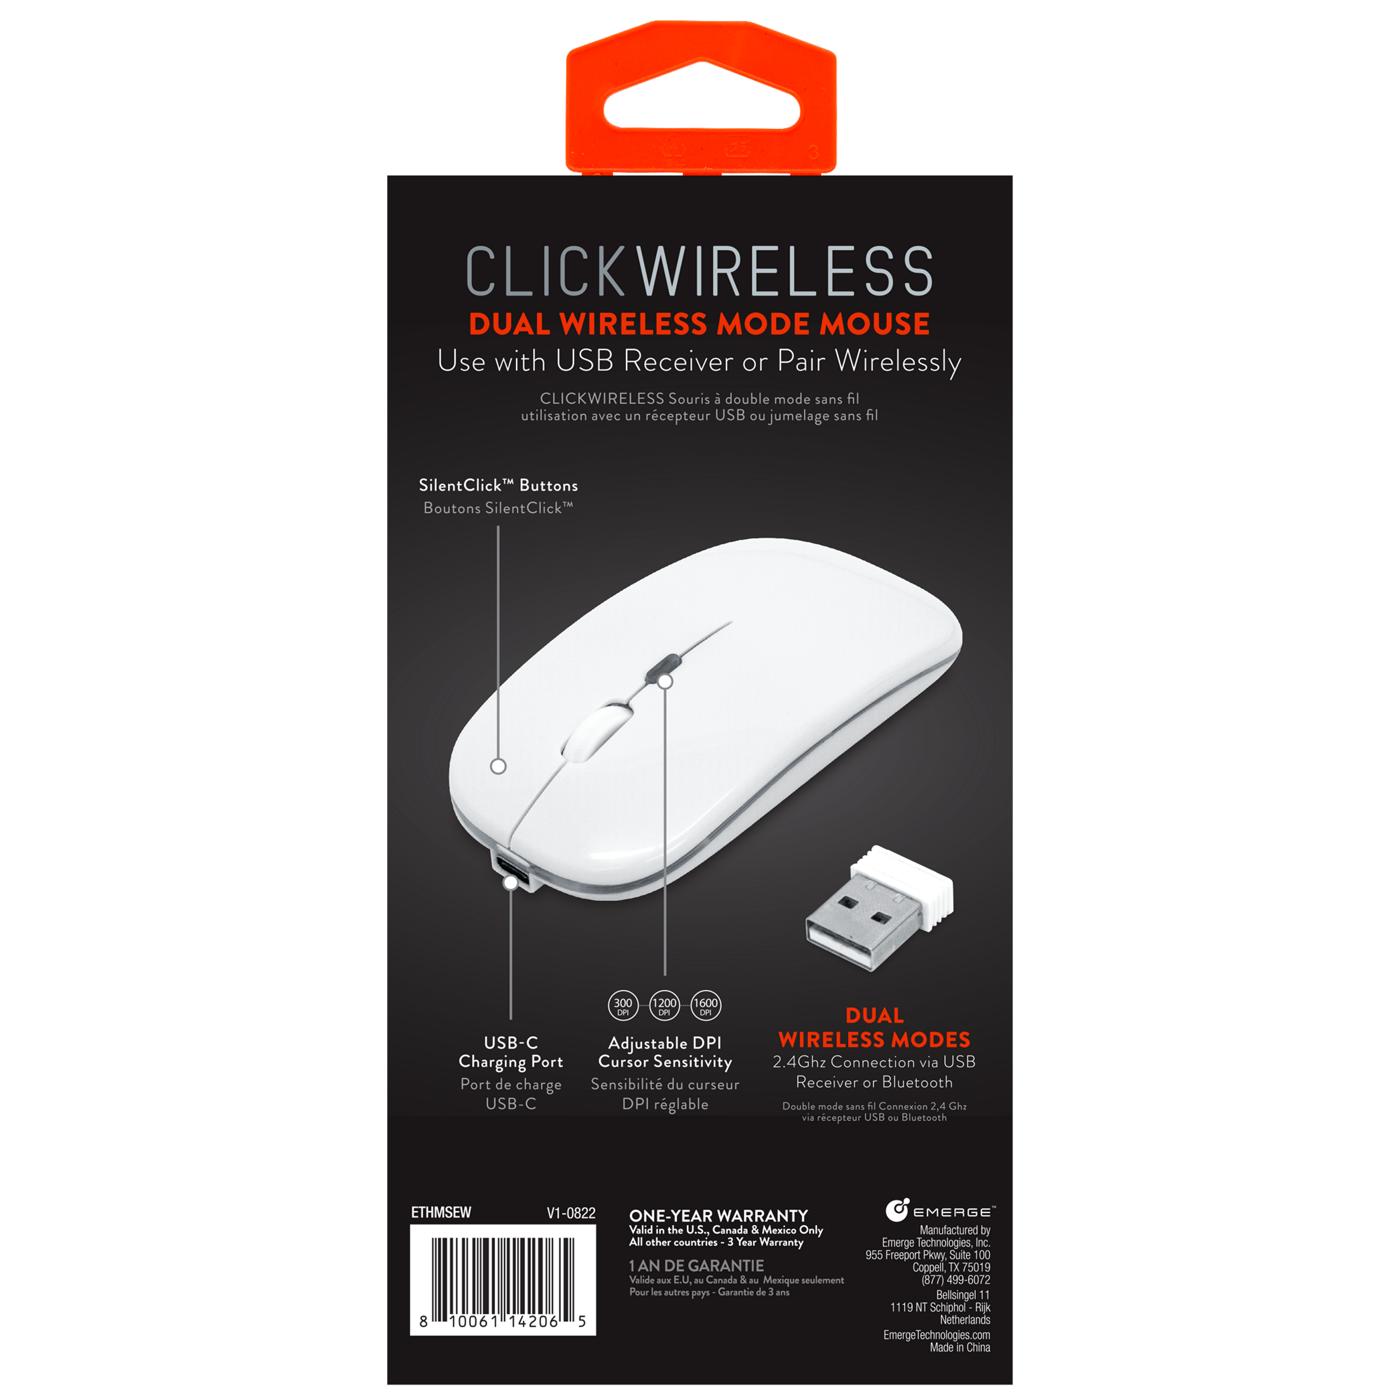 Helix Dual Wireless Mode Mouse - White; image 2 of 3